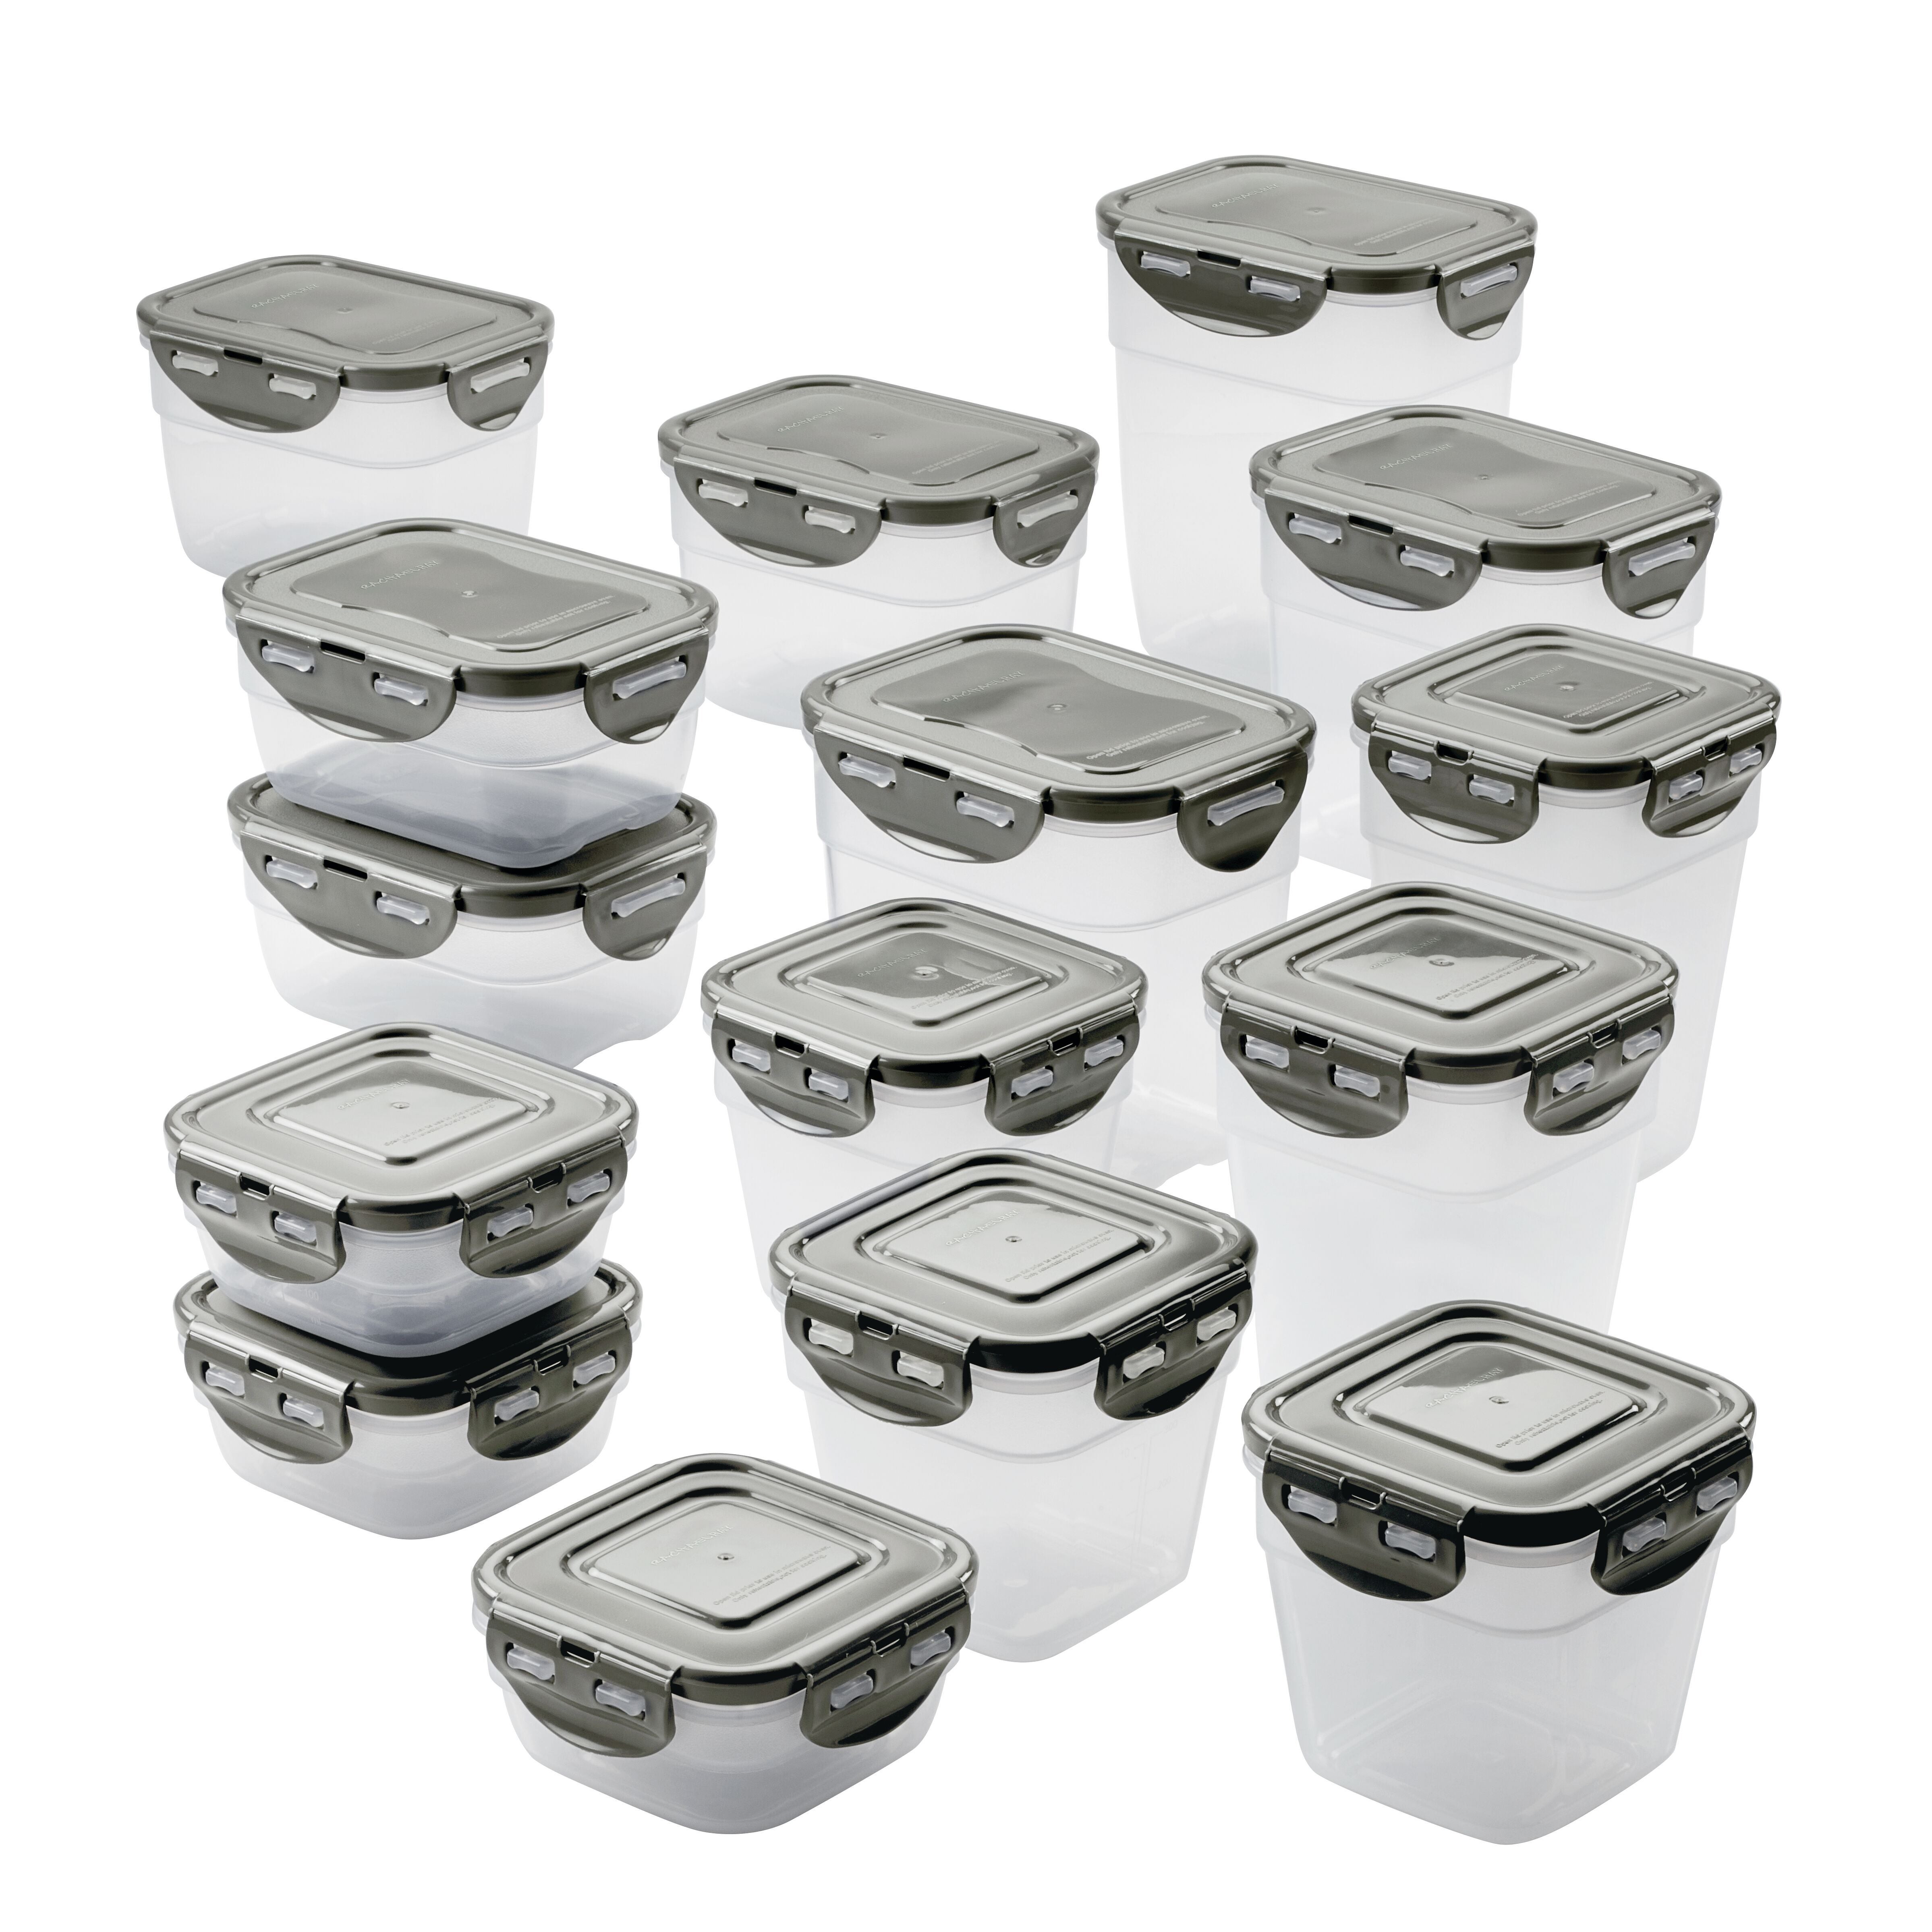 30pc Leakproof Stacking Container Food Storage Set Gray